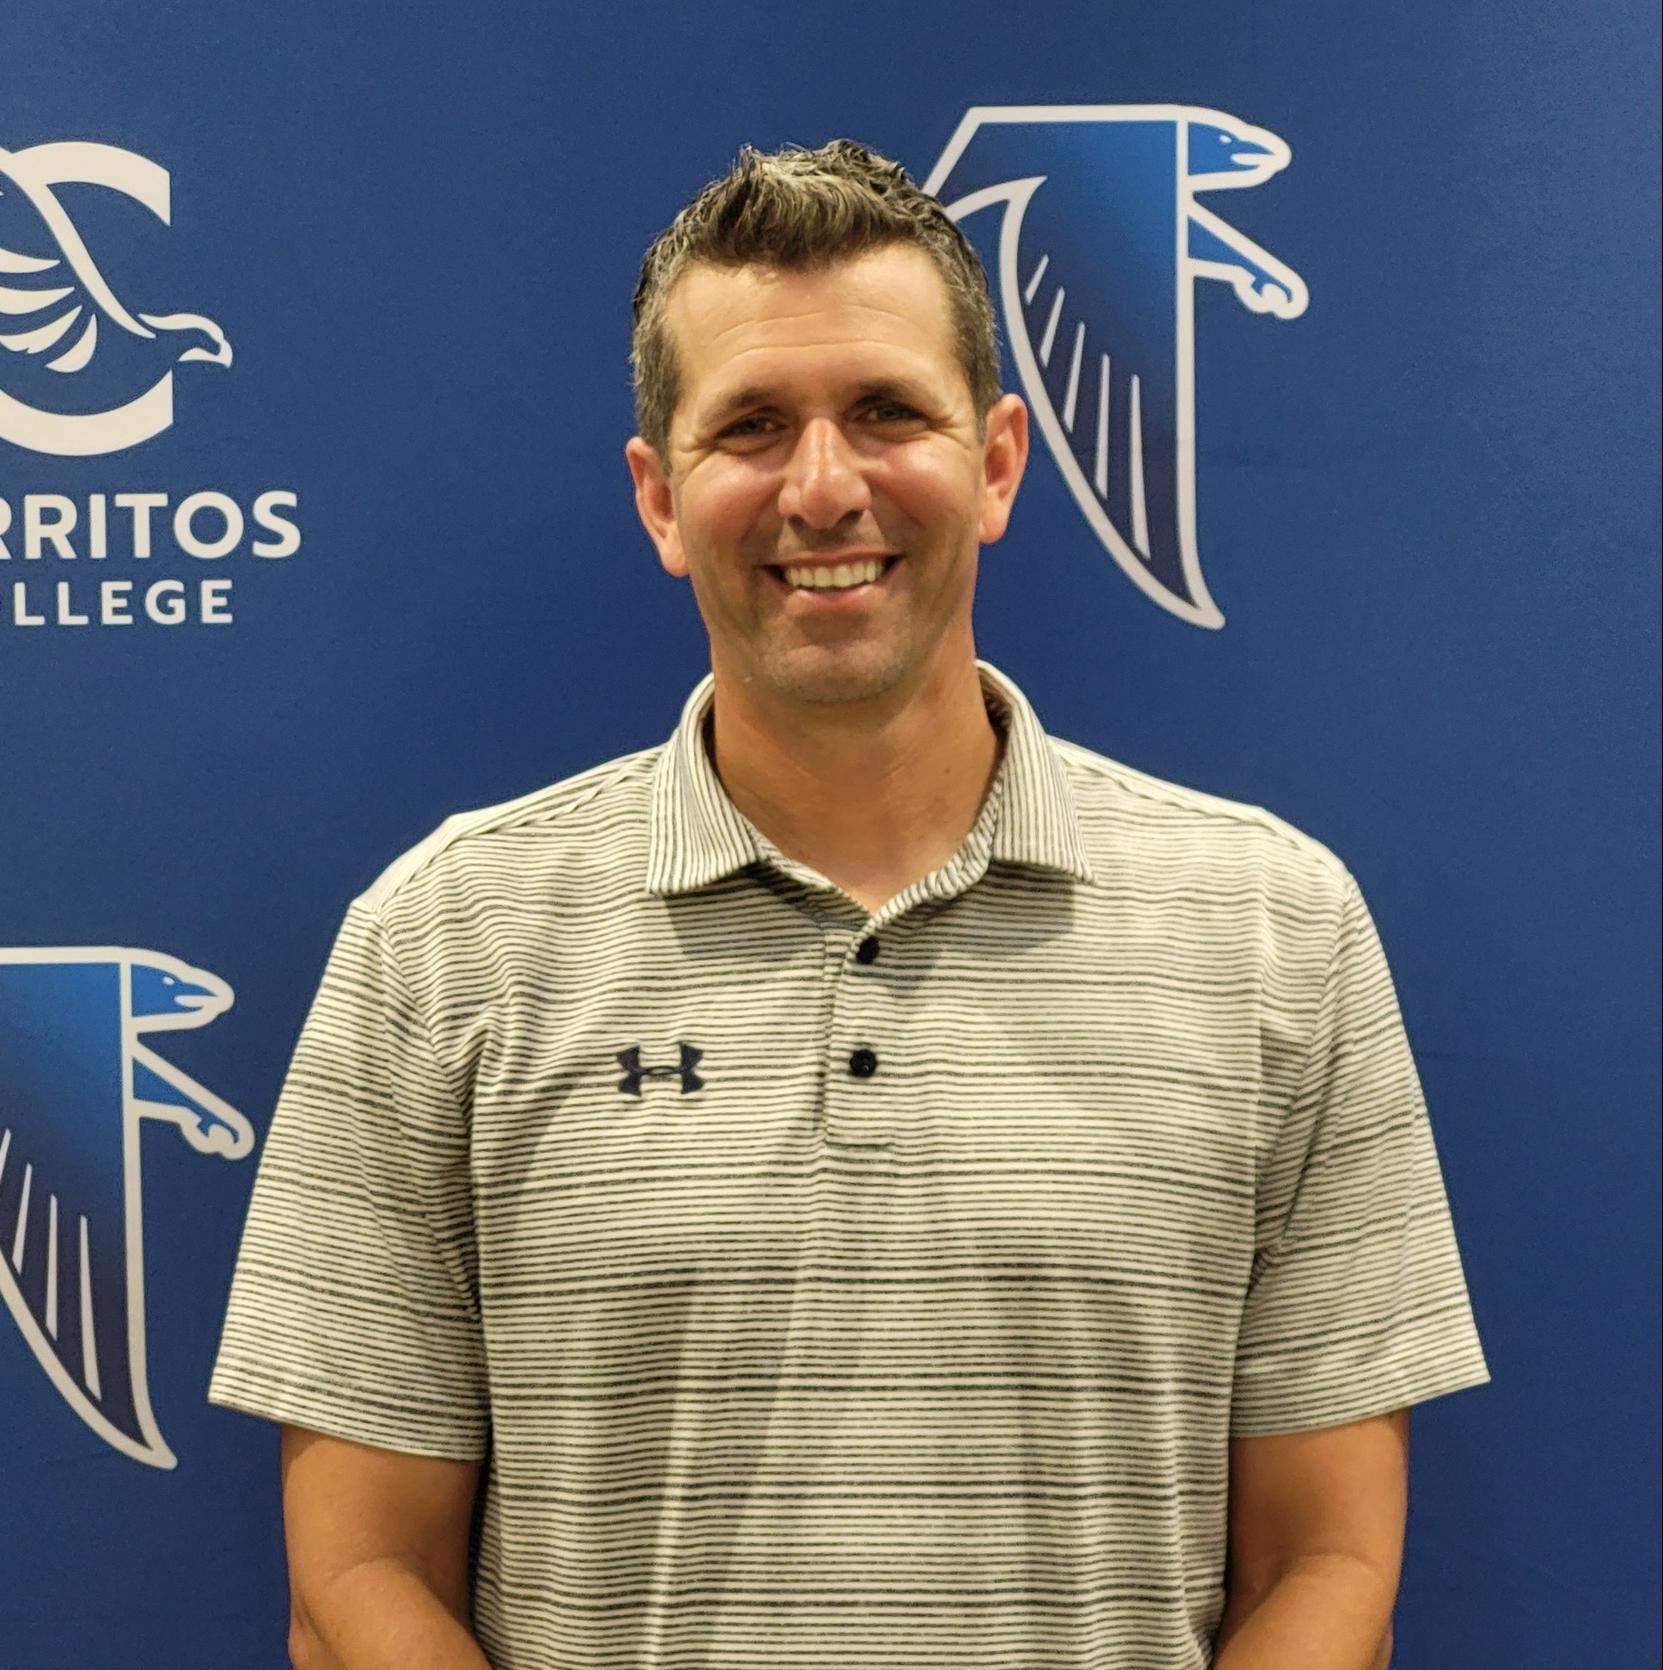 Nate Fernley is the new Cerritos College baseball head coach